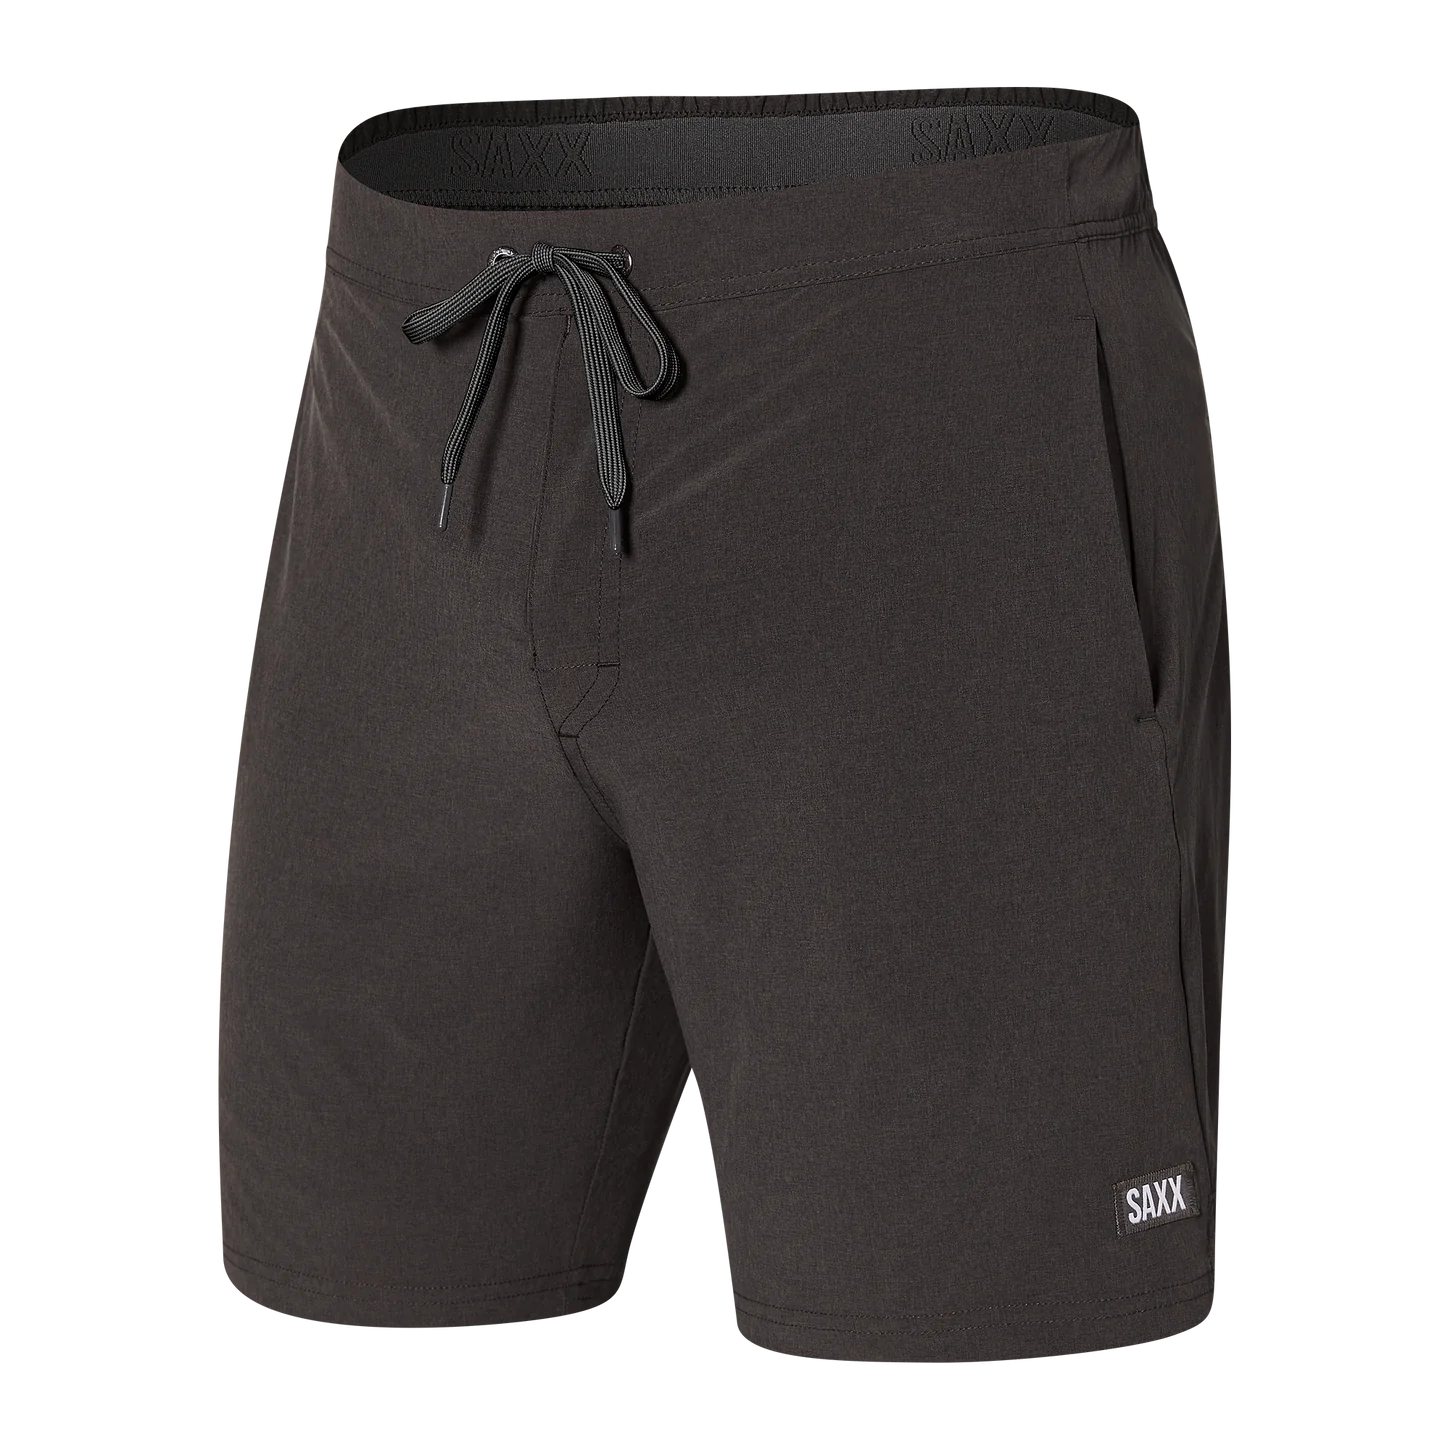 Saxx 7” Sport 2 Life 2 in 1 Short - Faded Black Heather Mens - Other Mens - Bottoms by Saxx | Grace the Boutique